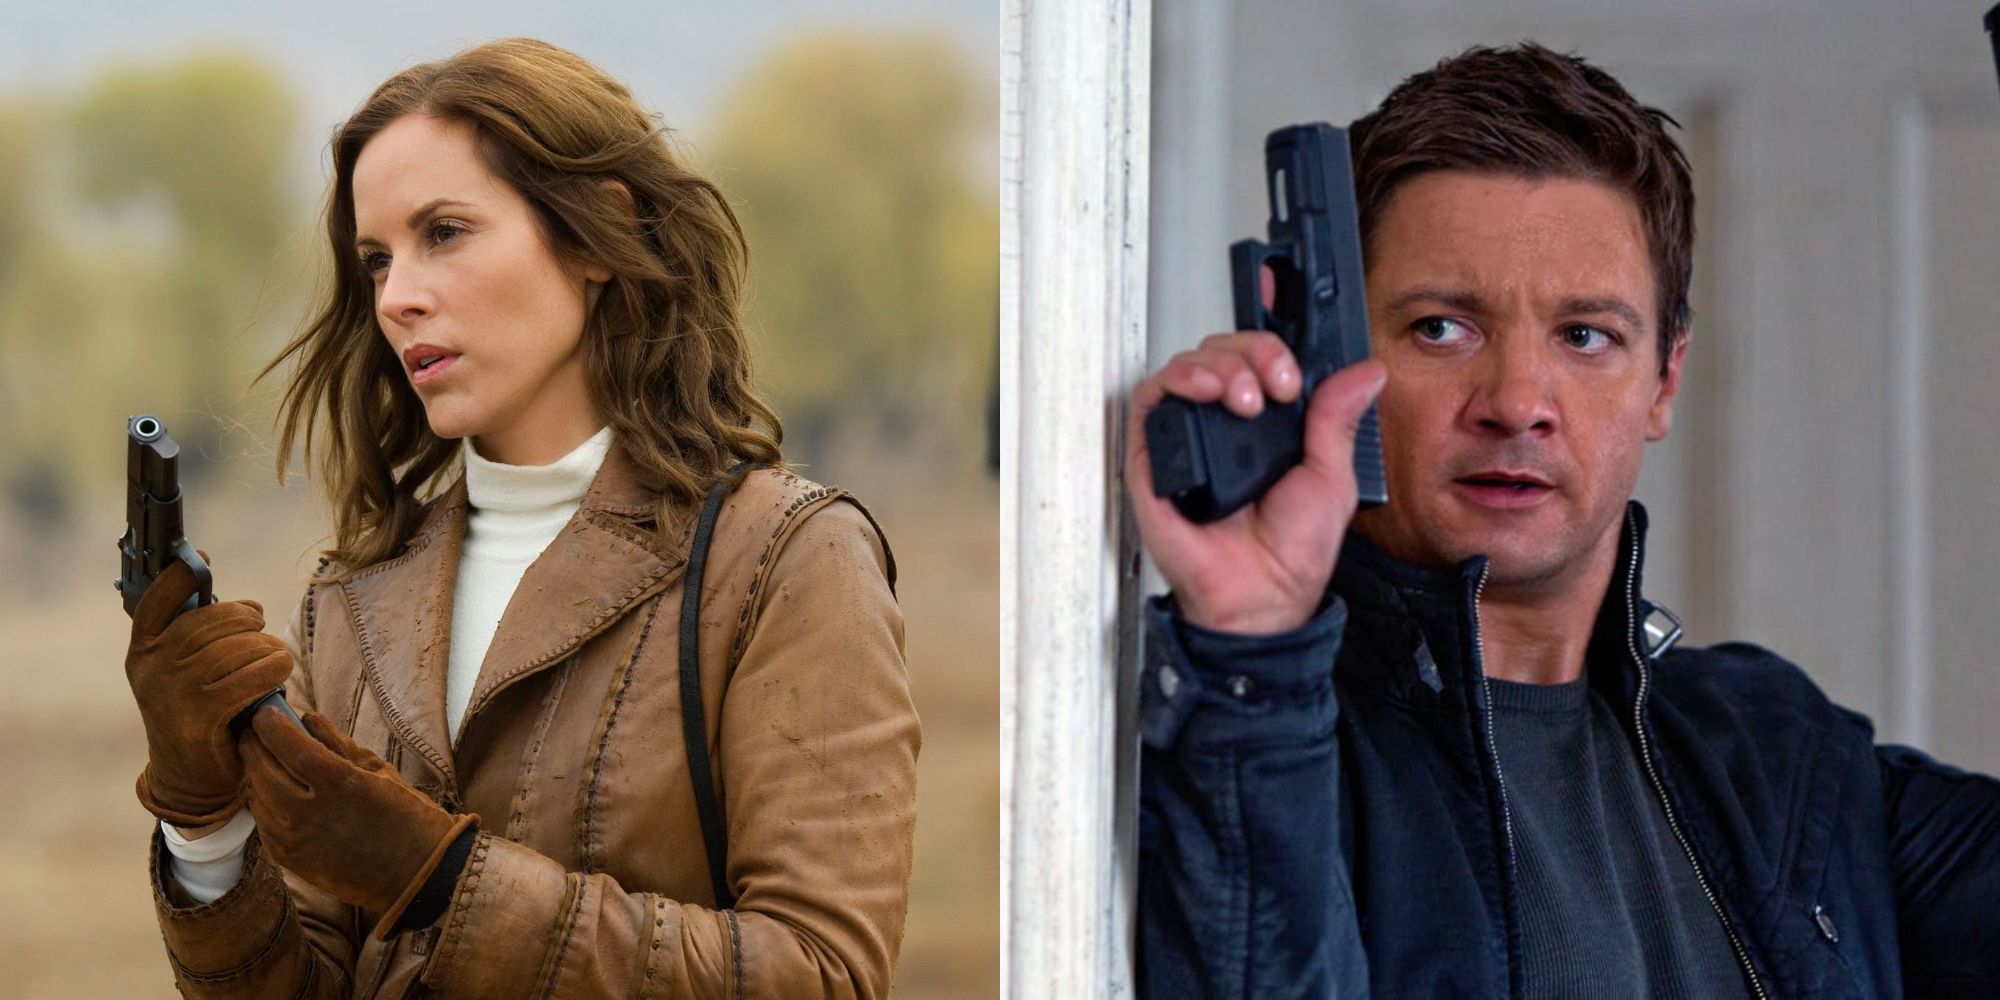 Split image showing Evelyn in The Mummy: Tomb of the Dragon Emperor and Aaron in The Bourne Legacy.